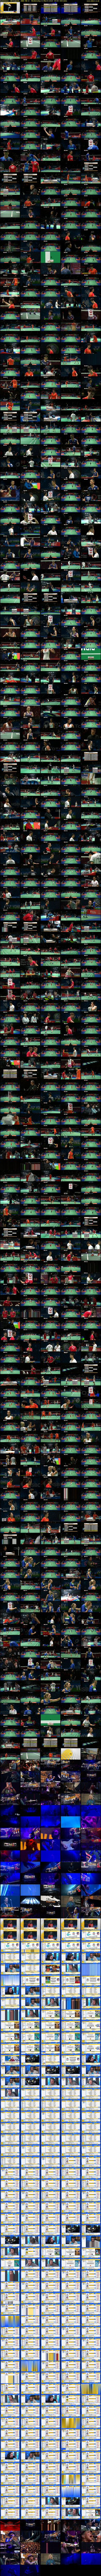 Badminton - All England... (BBC RB 1) Wednesday 11 March 2020 09:00 - 23:00